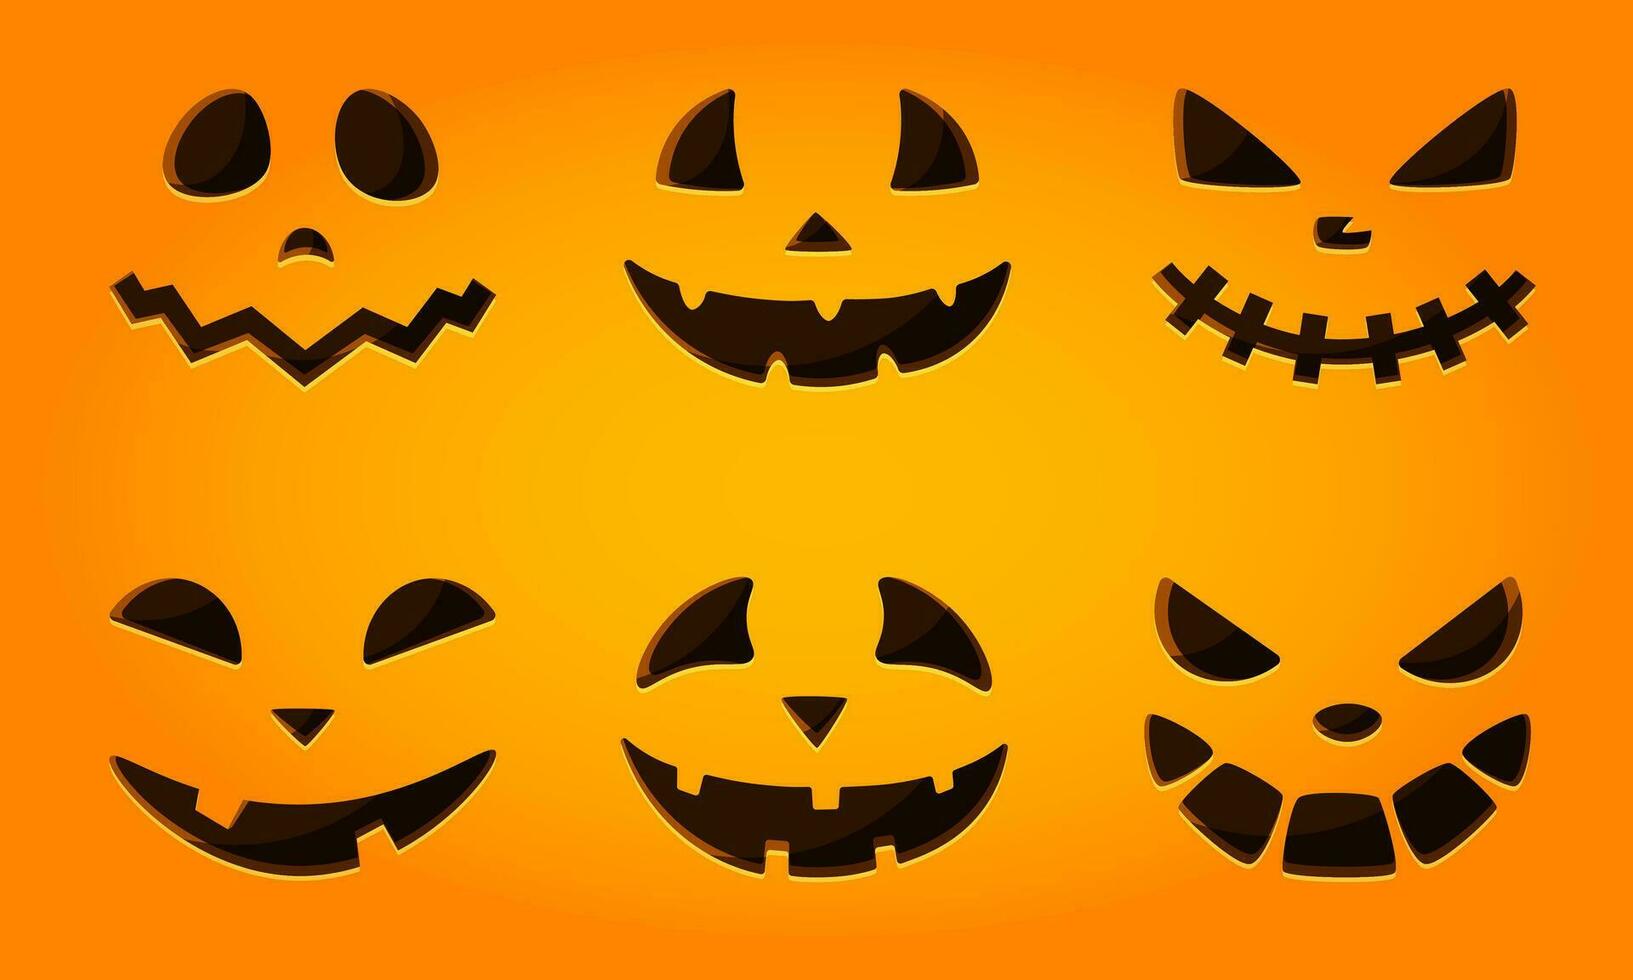 Black isolated Halloween pumpkin face patterns on orange. Scary and funny faces of Halloween pumpkin or ghost. Vector illustration